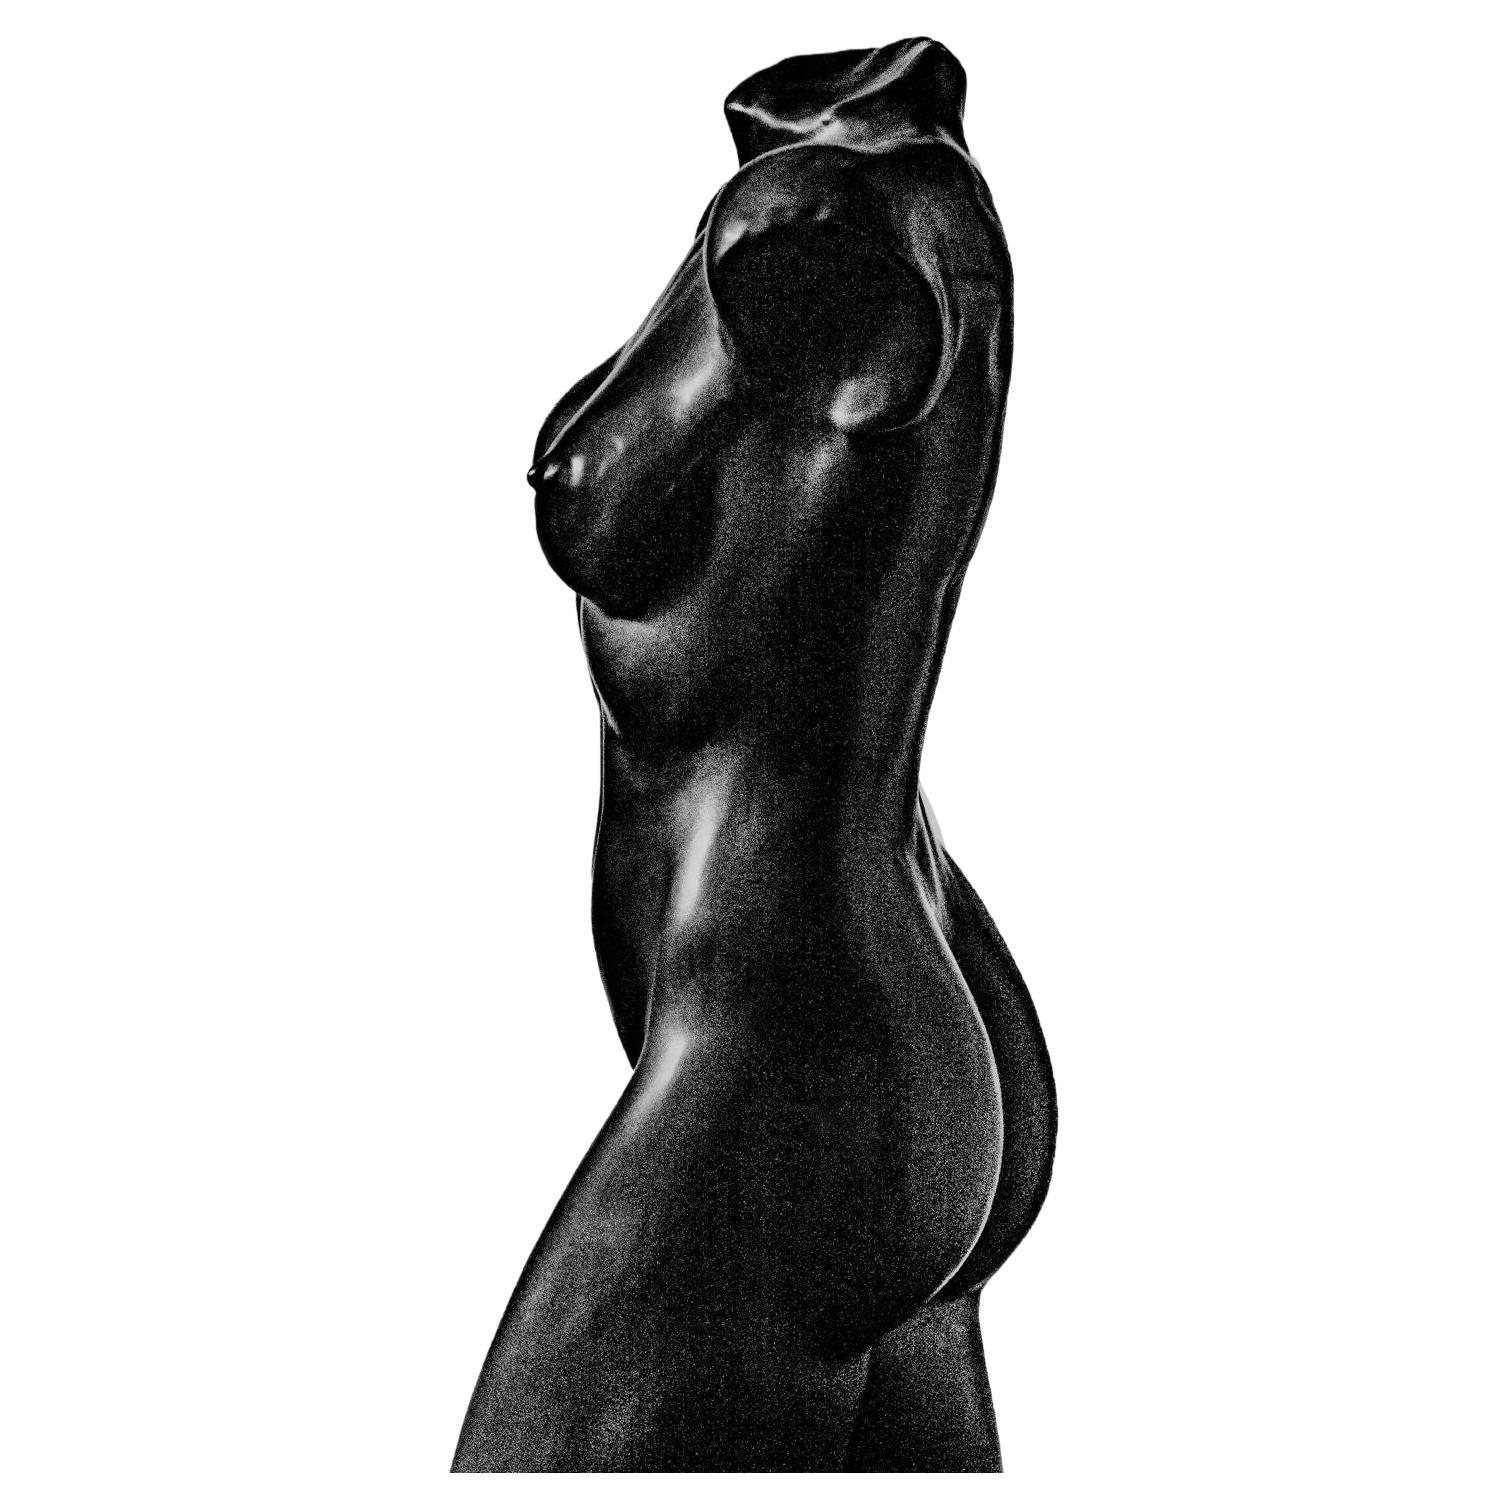 A fascinating handcrafted sculptural work celebrating feminine beauty. 